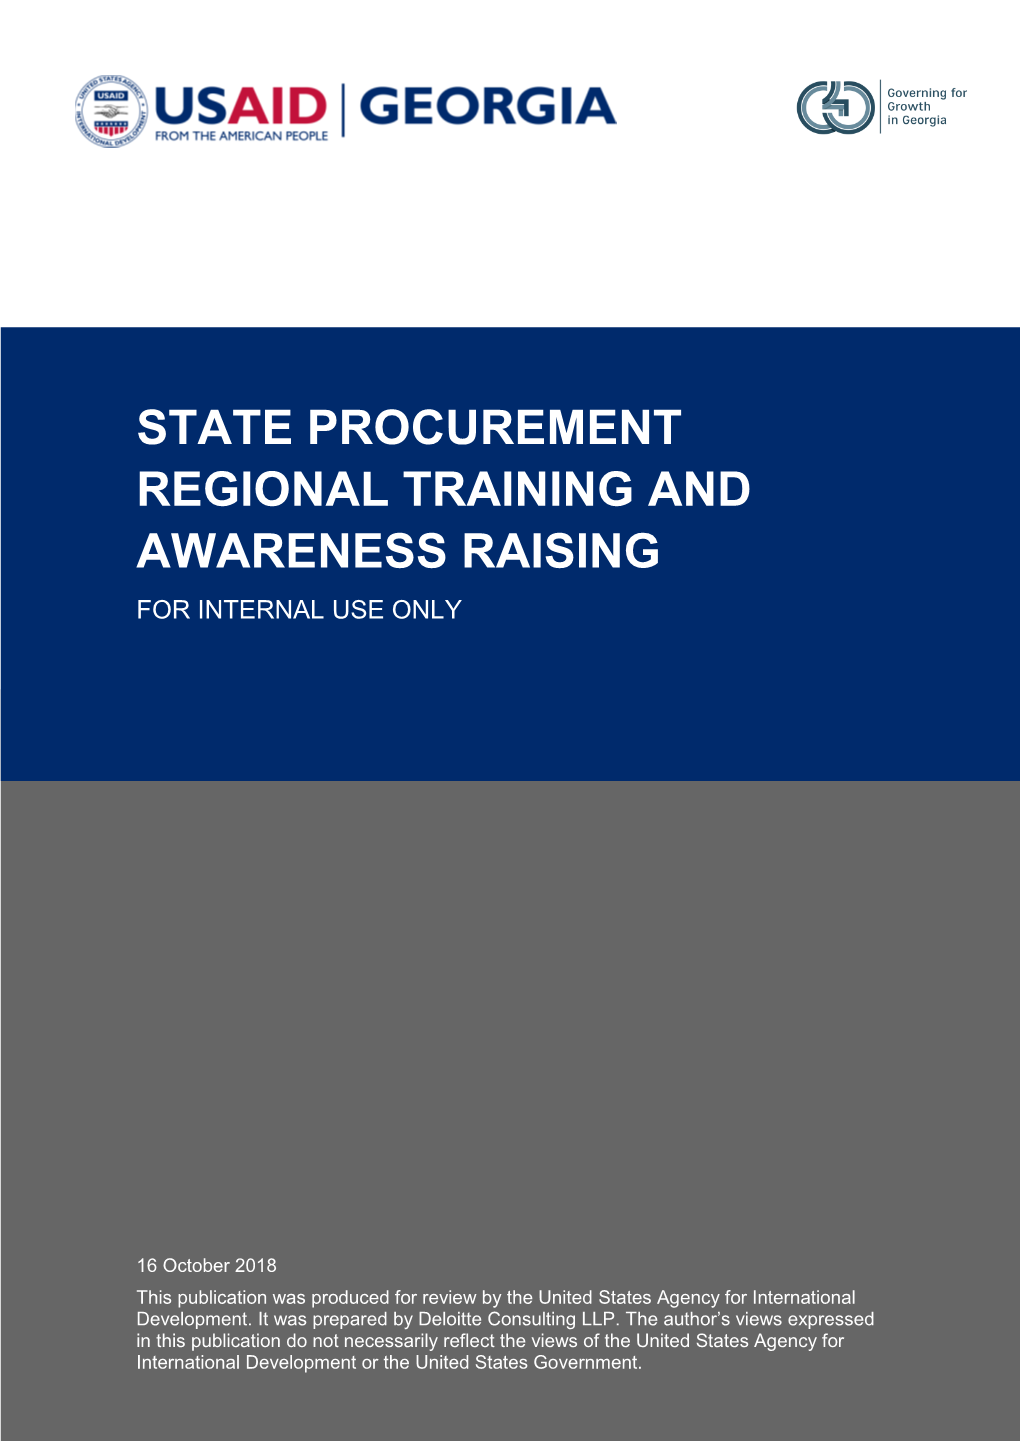 State Procurement Regional Training and Awareness Raising for Internal Use Only